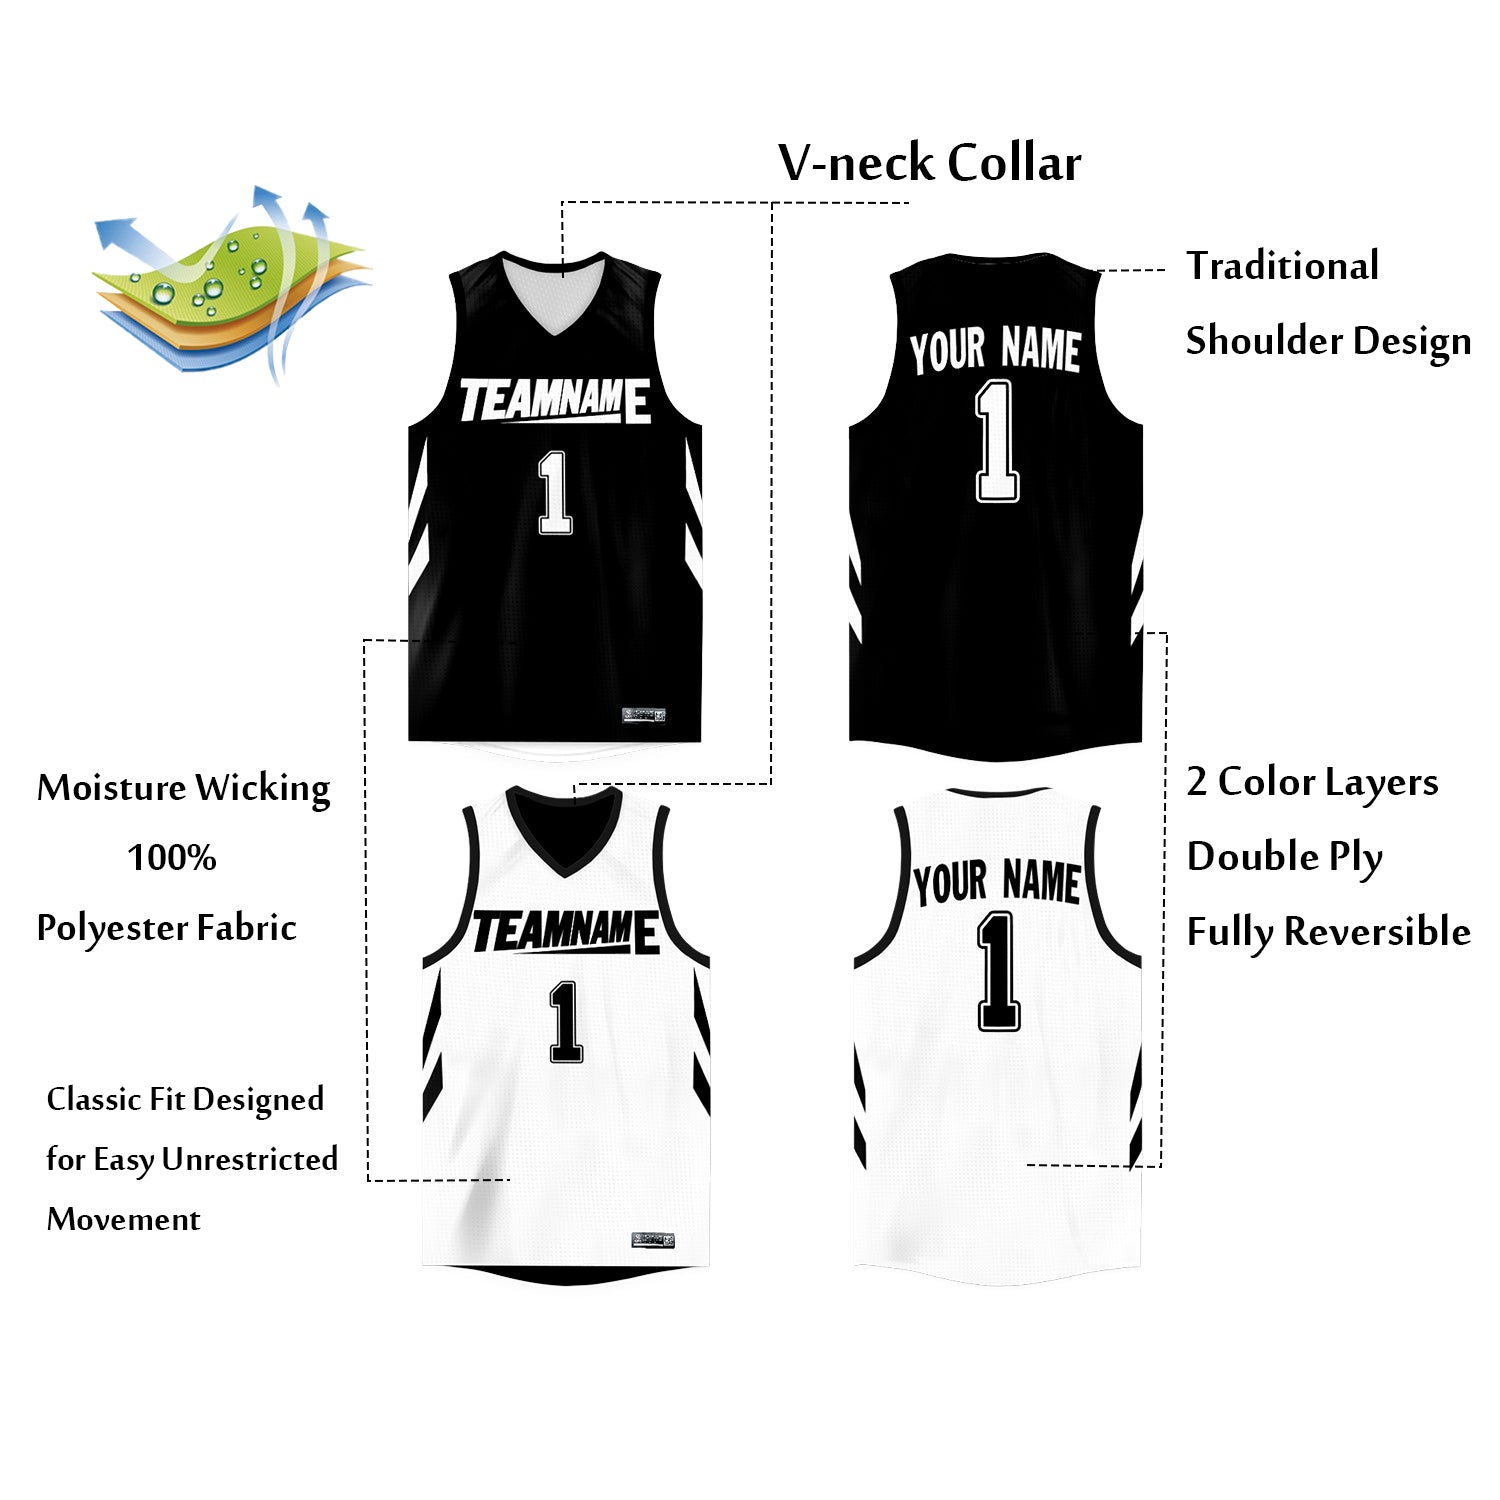 black and white reversible basketball jersey